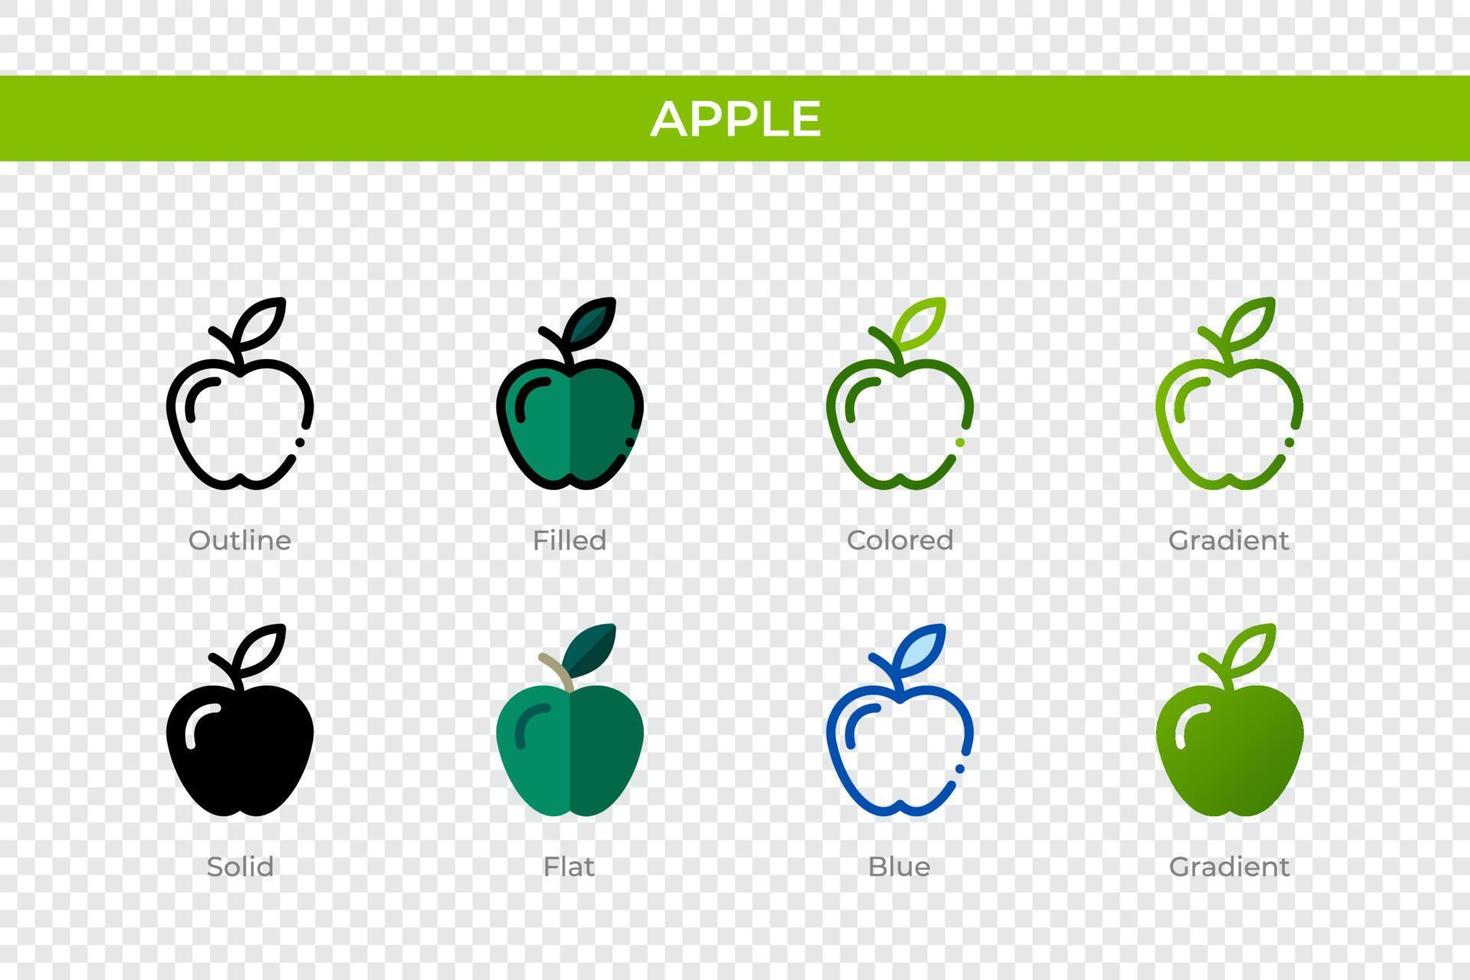 Apple icon in different style. Apple vector icons designed in outline, solid, colored, filled, gradient, and flat style. Symbol, logo illustration. Vector illustration